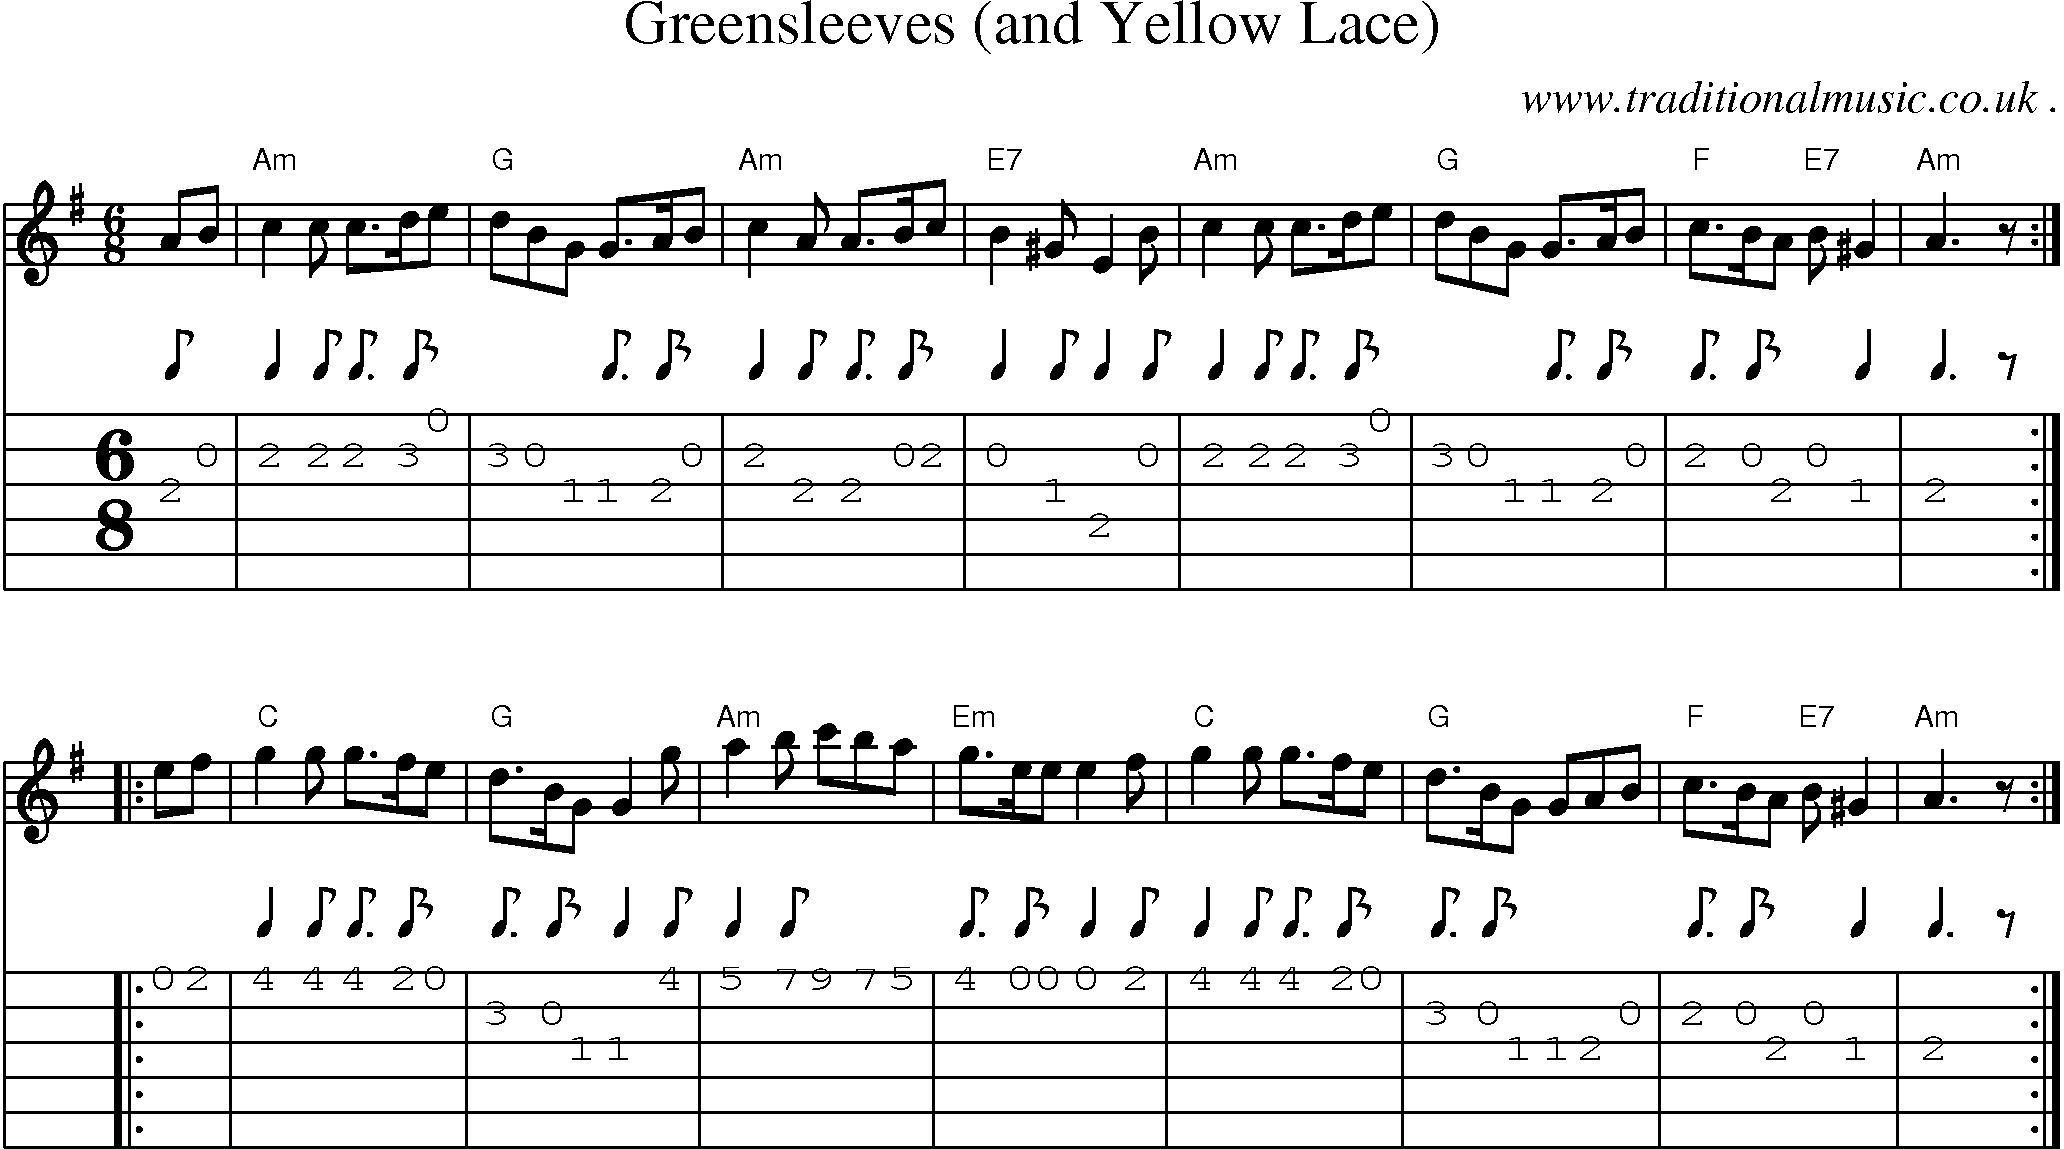 Sheet-music  score, Chords and Guitar Tabs for Greensleeves And Yellow Lace